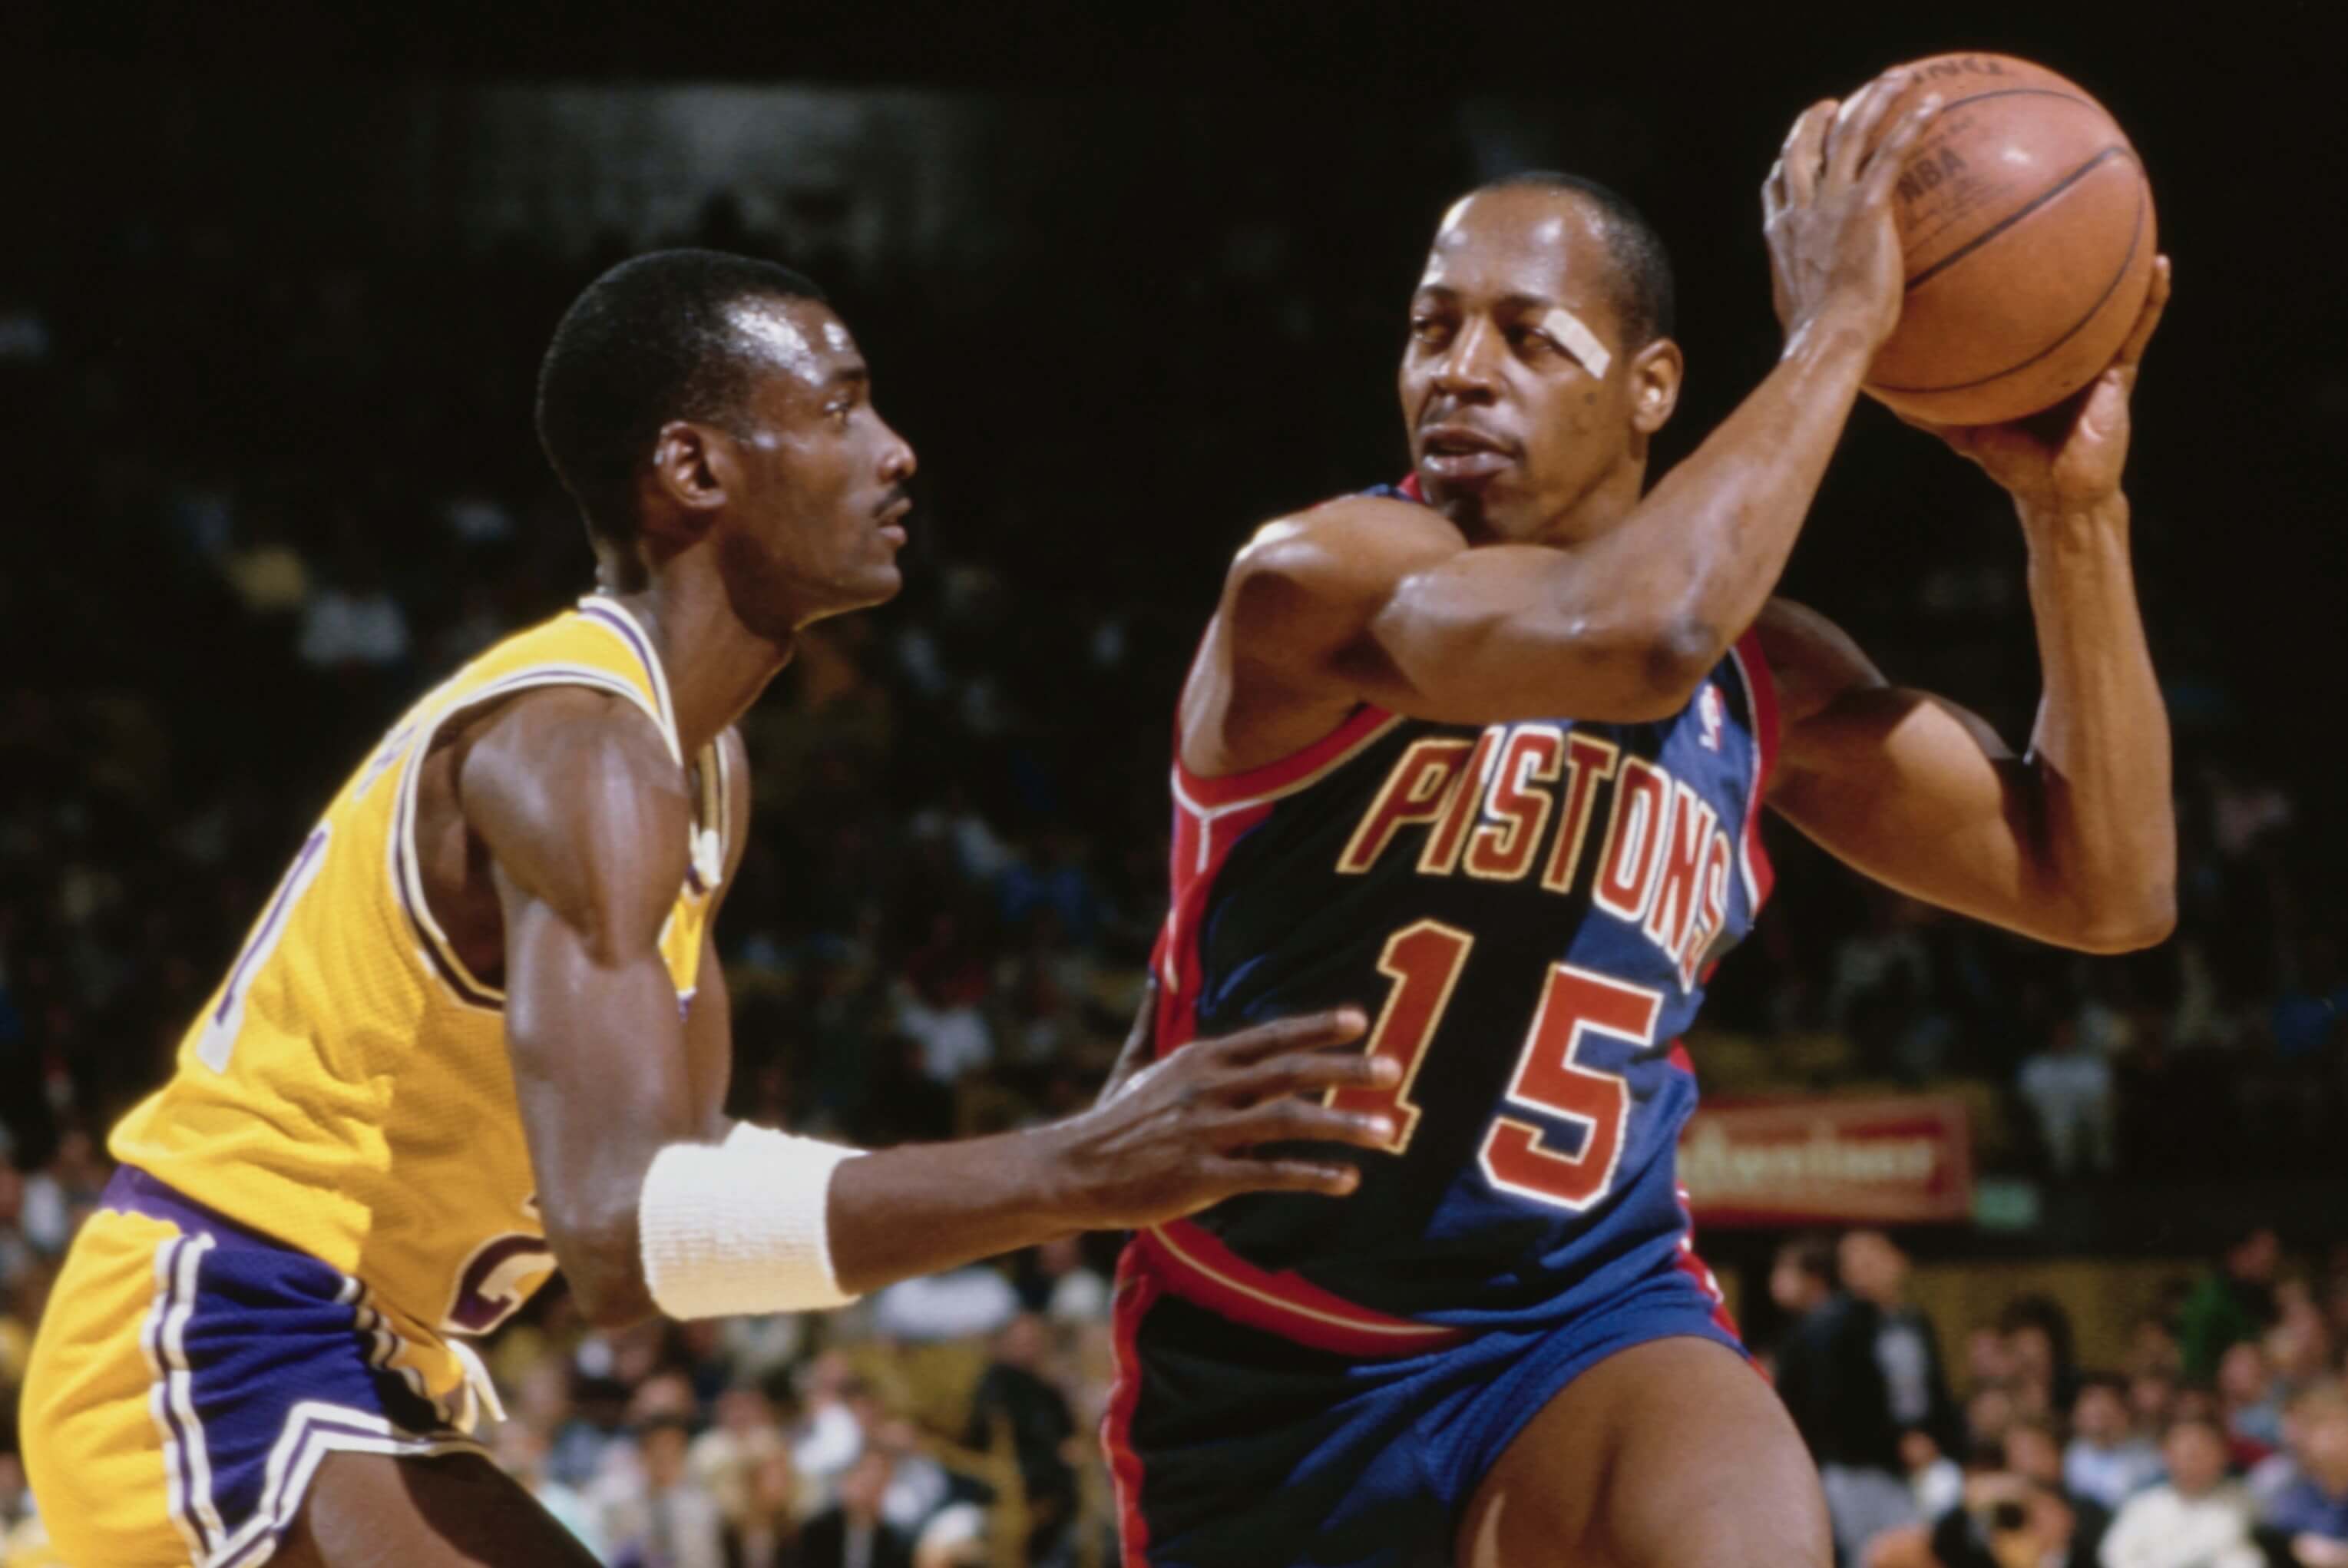 Vinnie Johnson of the Detroit Pistons is guarded by Michael Cooper of the Los Angeles Lakers.